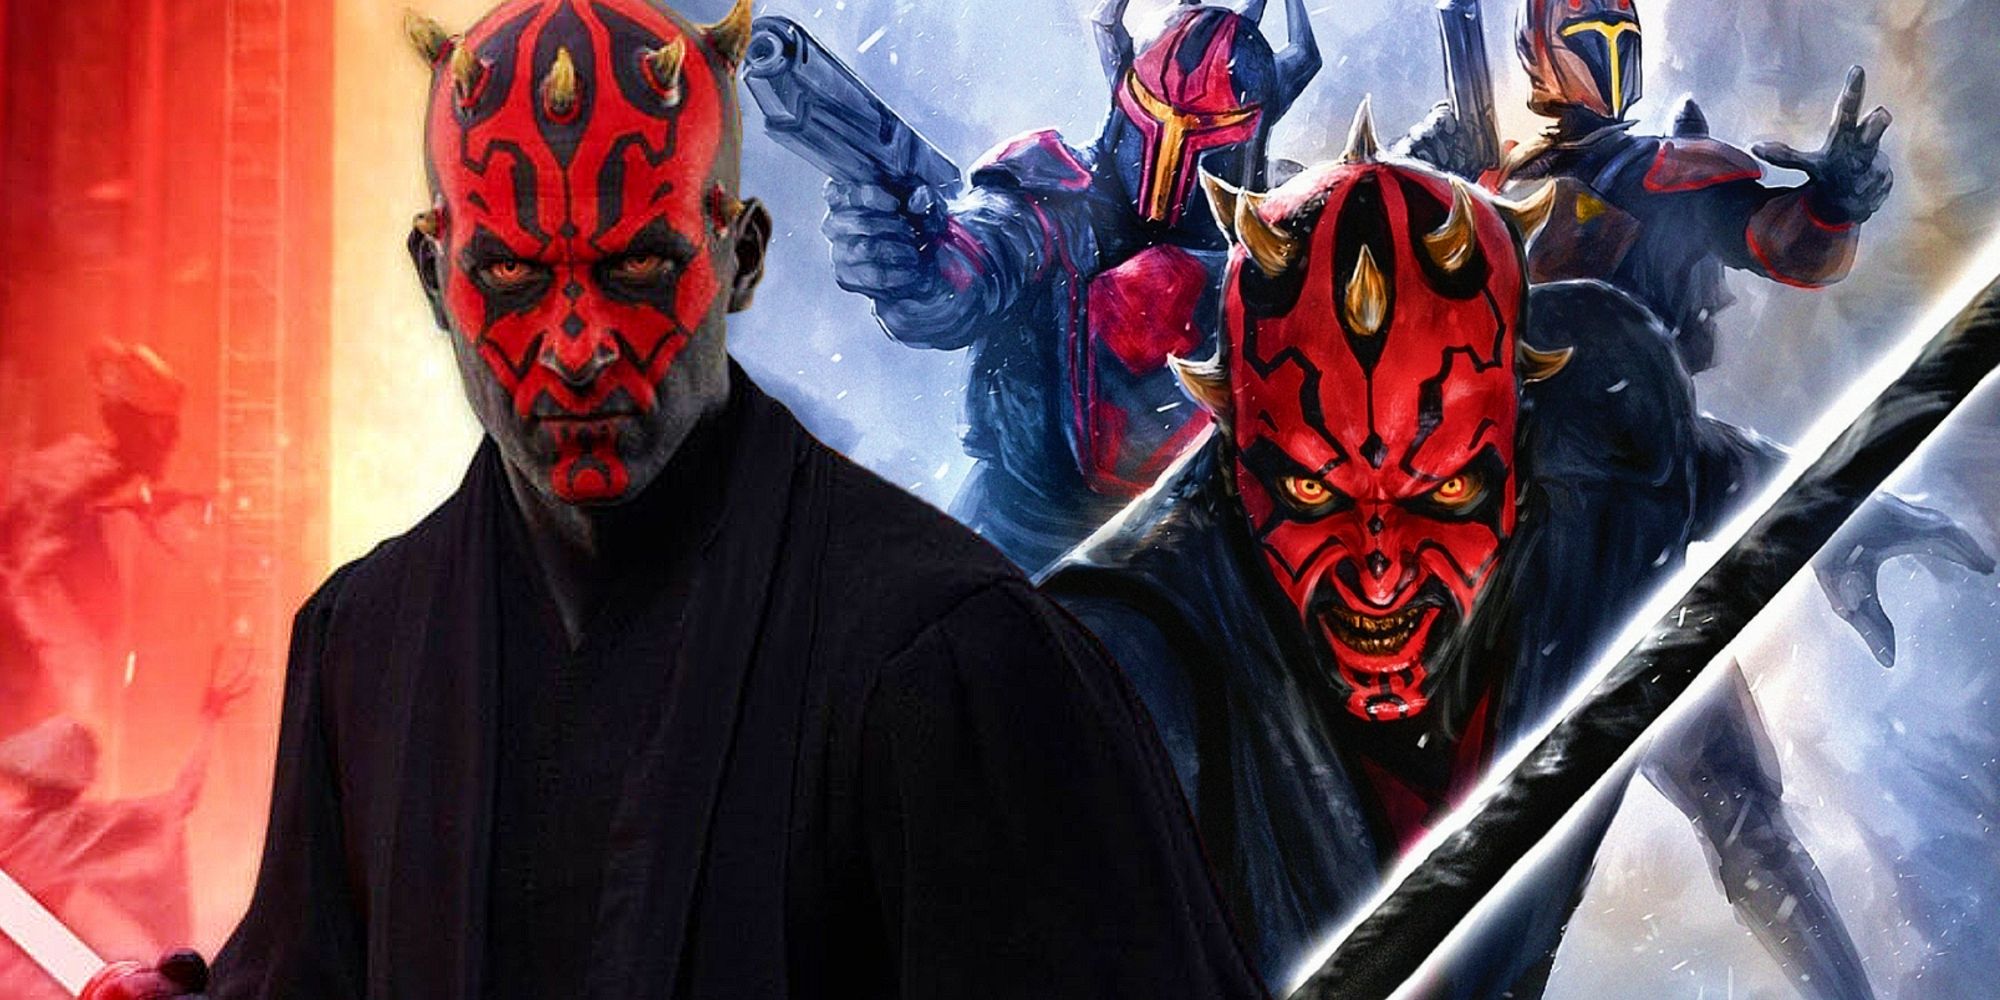 Darth Maul from Star Wars next to artwork from the Son of Dathomir comics